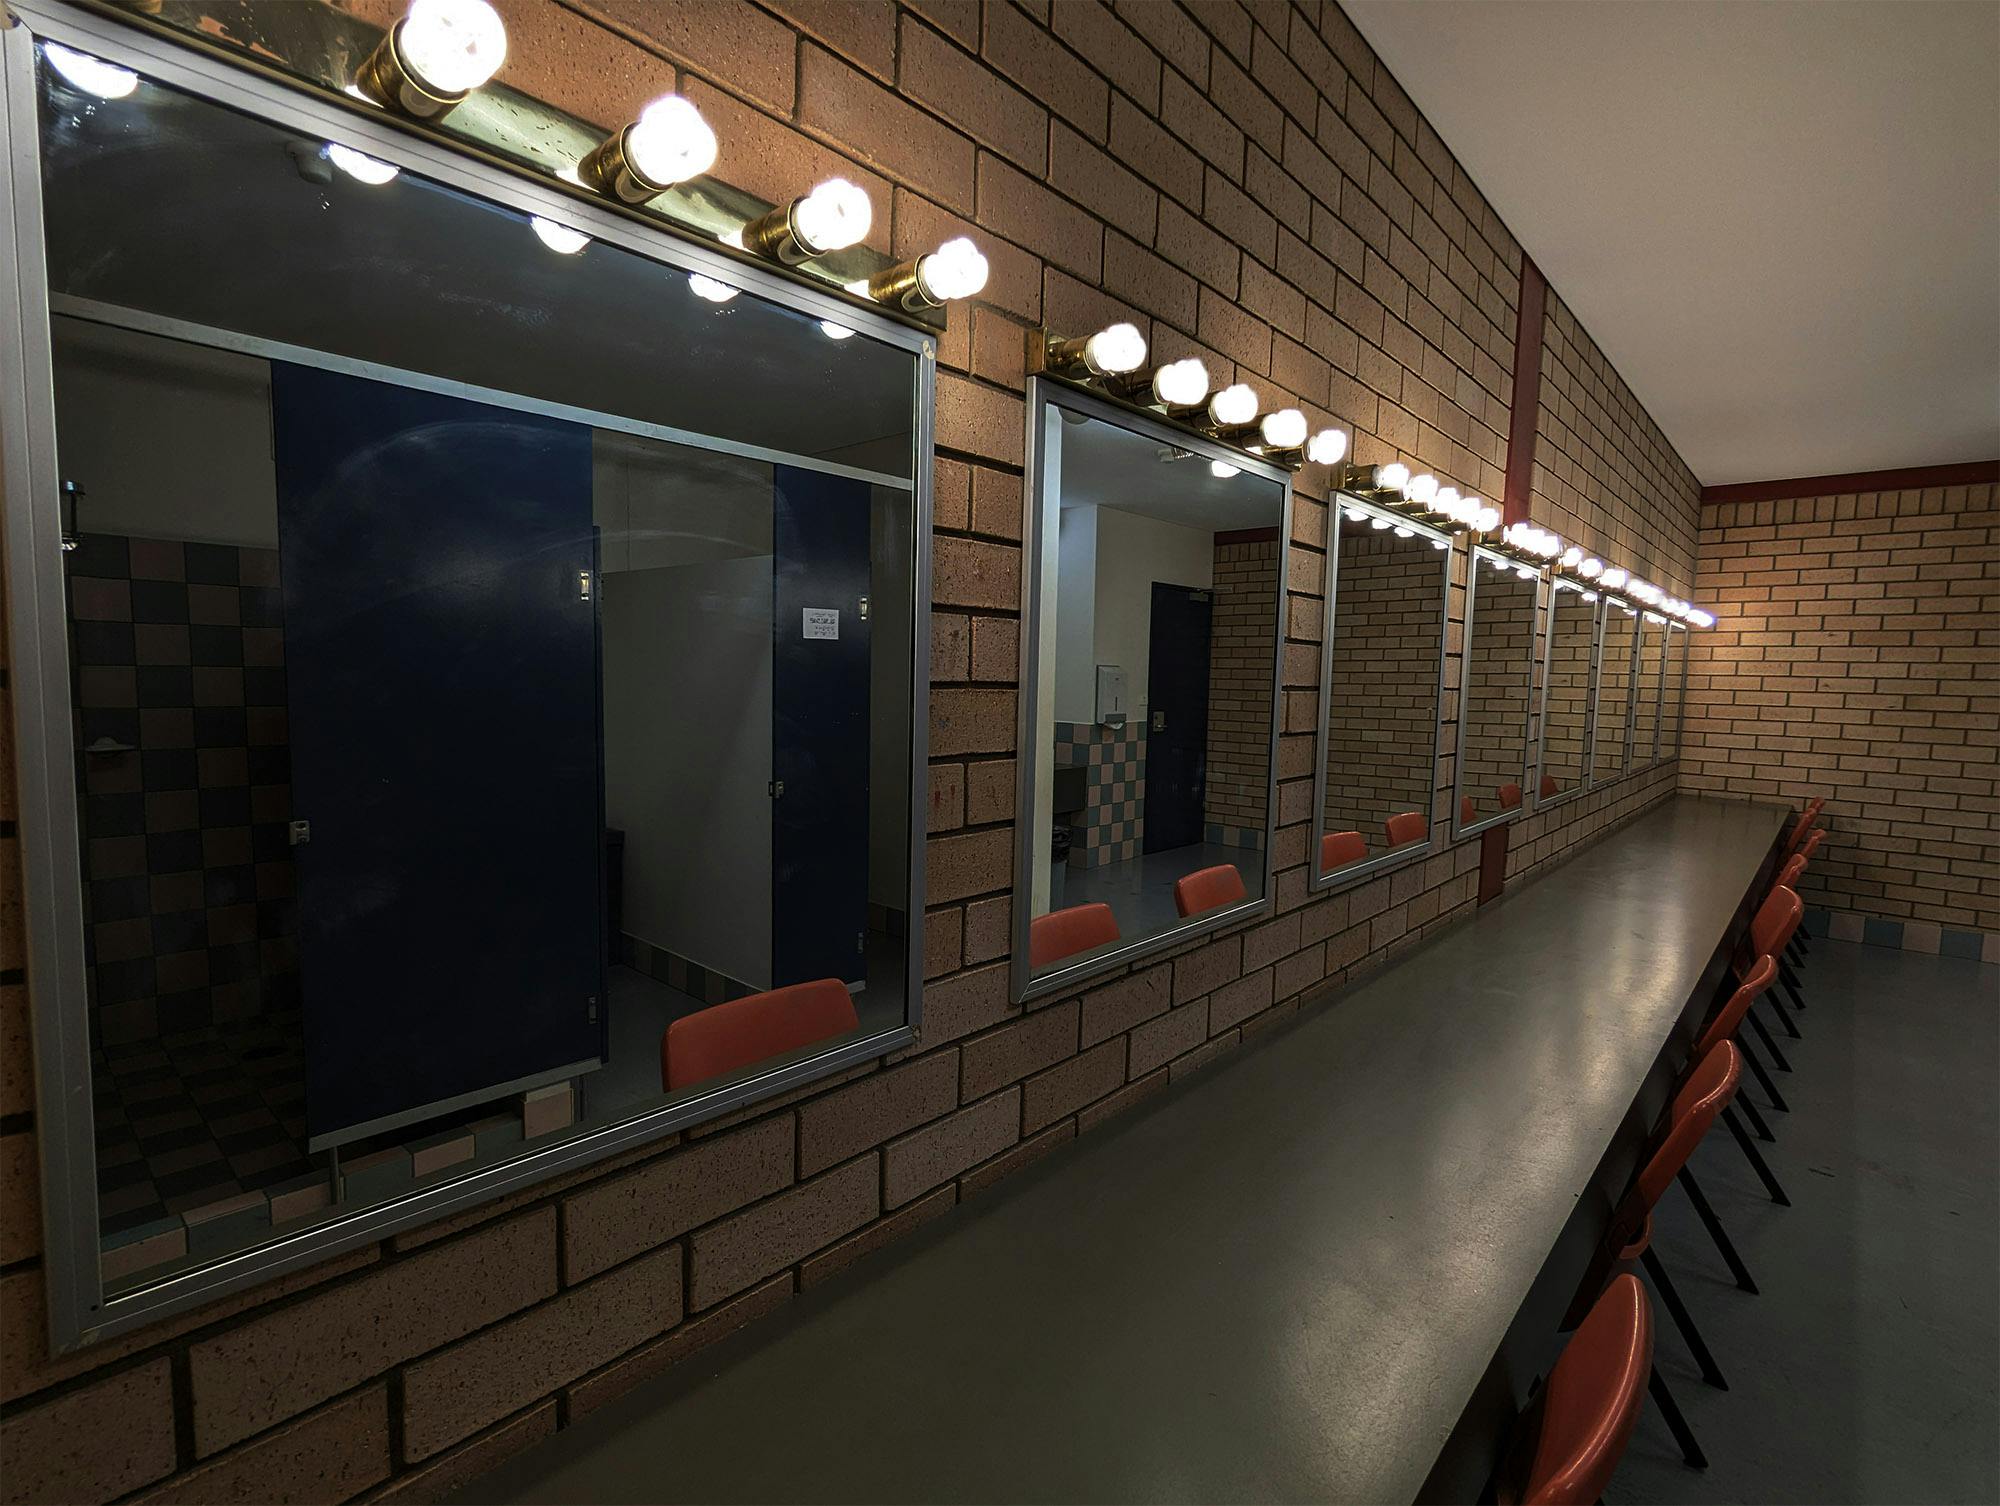 The Dressing Room at the Belconnen Community Theatre